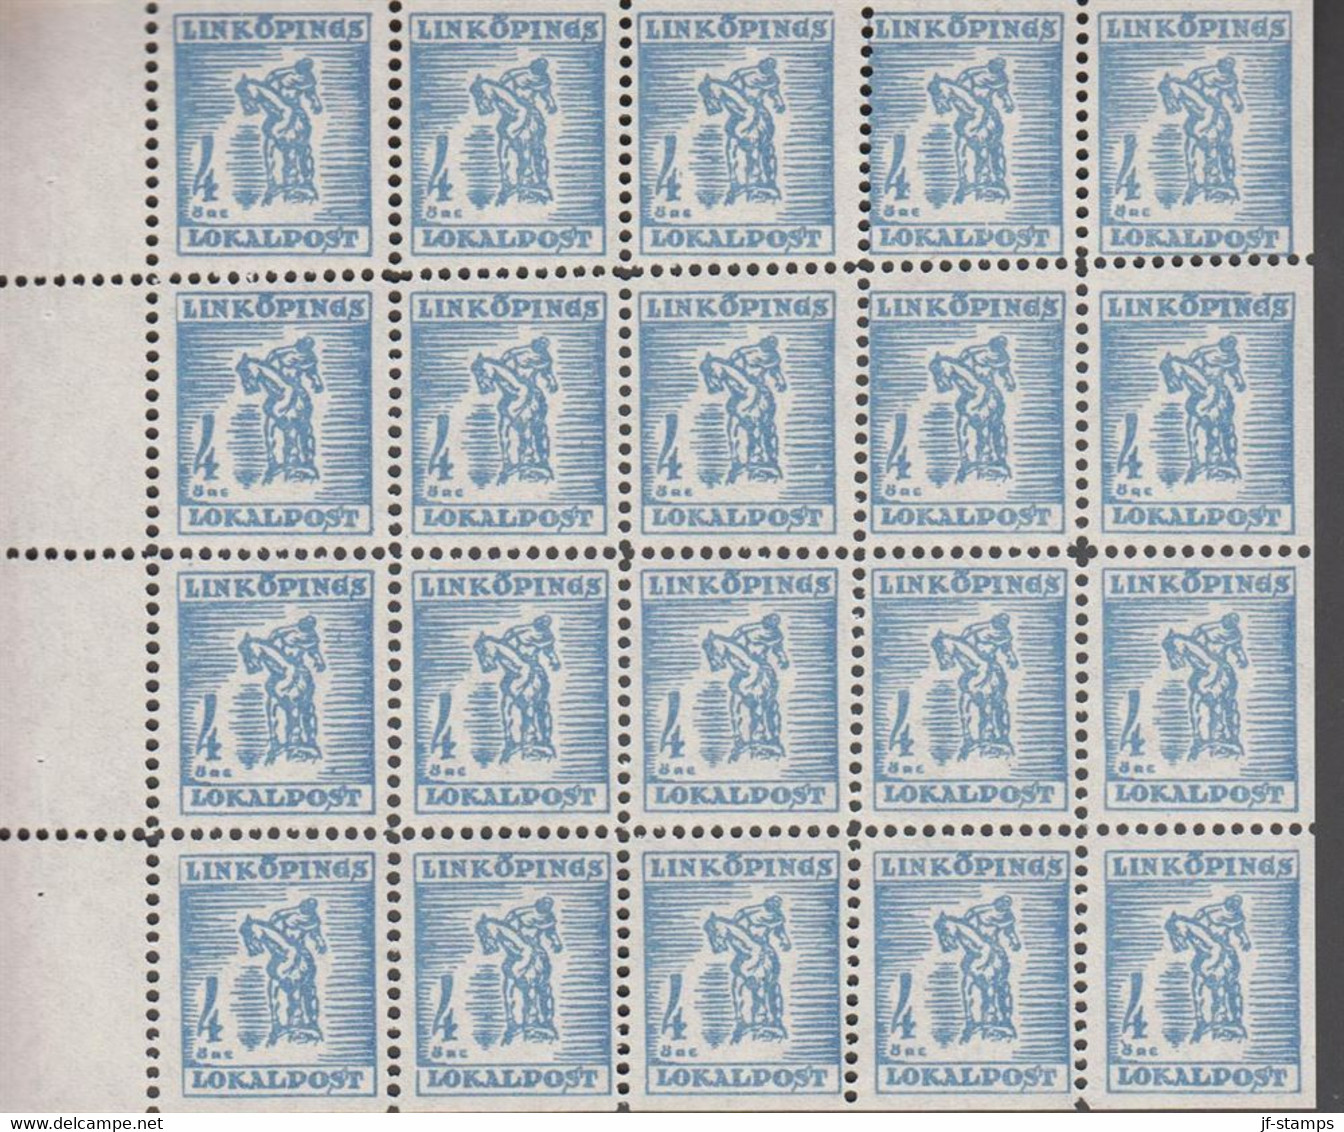 1945. SVERIGE.  LINKÖPINGS LOKALPOST 4 ÖRE In Complete Sheet With 20 Stamps. Never Hinged. Unusual Sheet.  - JF520108 - Emissions Locales